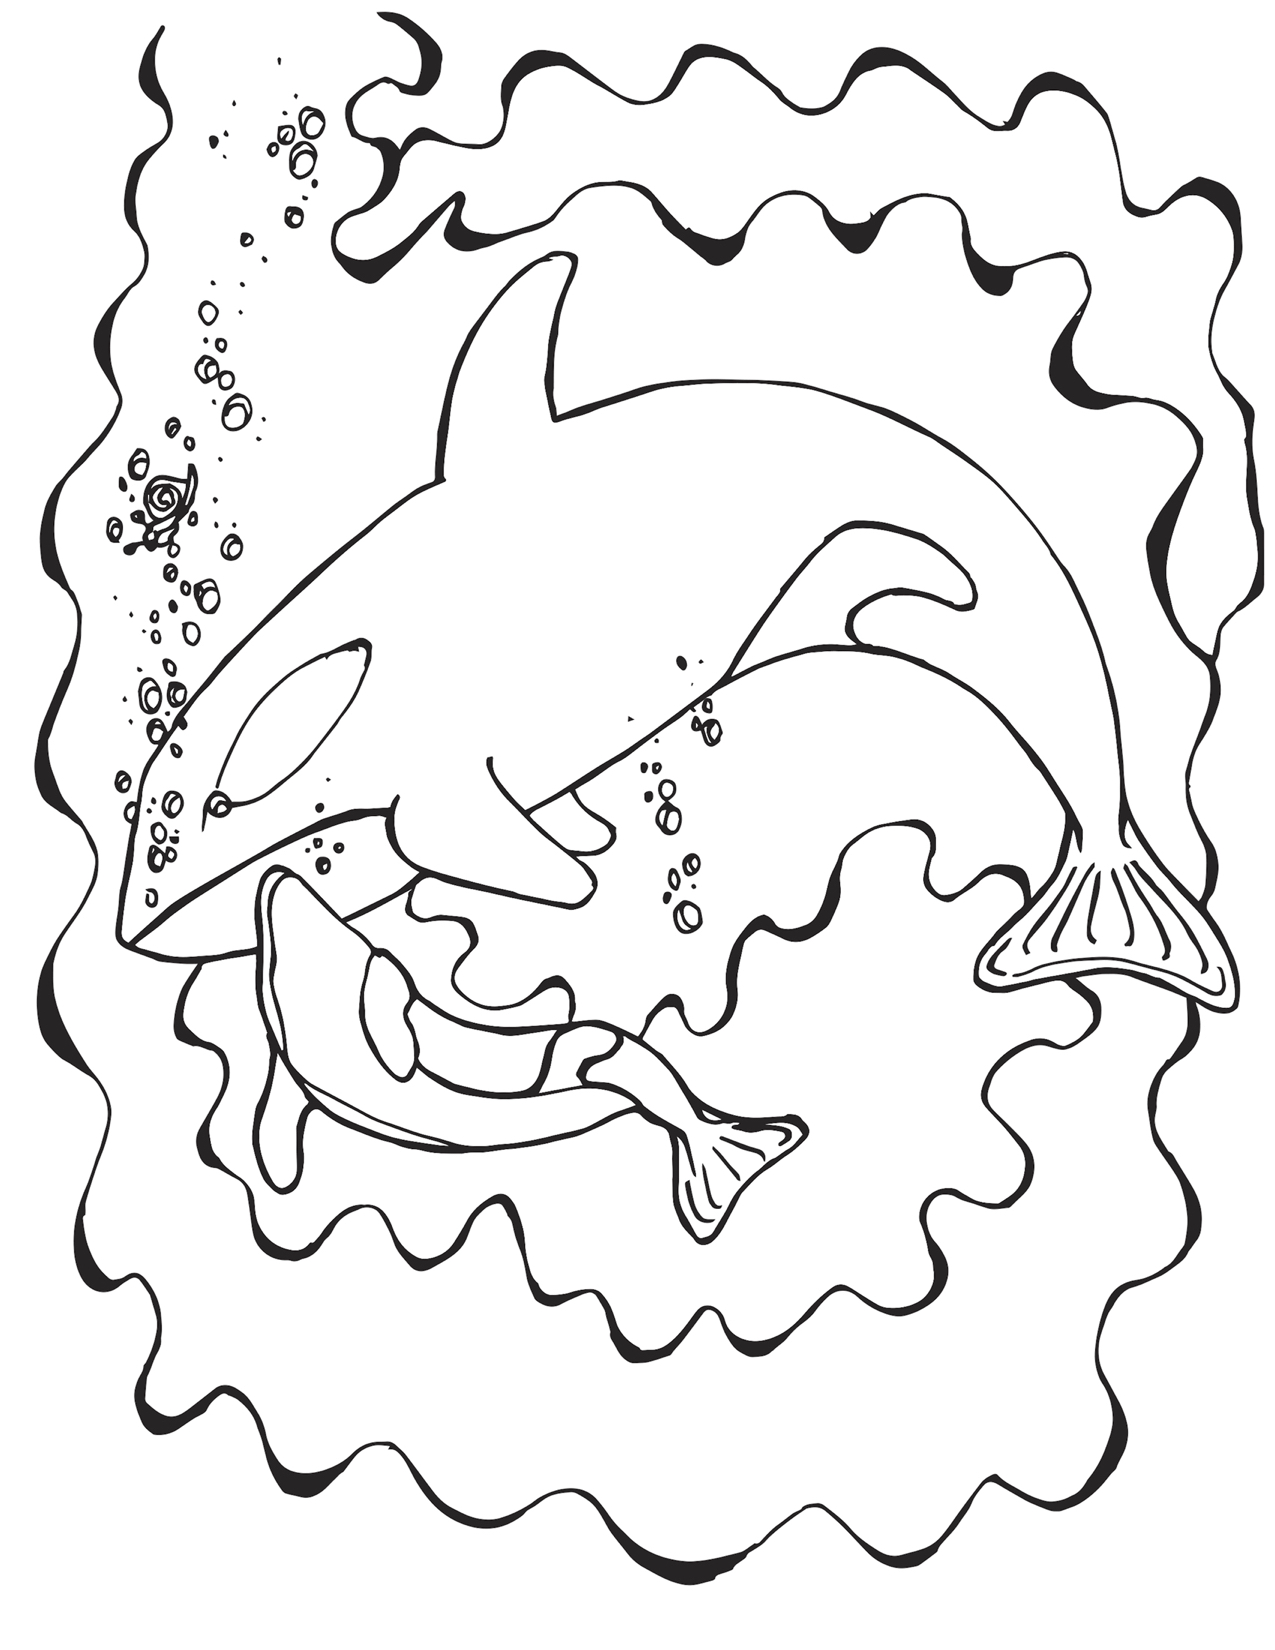 Momma and baby orca whale cuddling coloring page â mermaid coloring pages